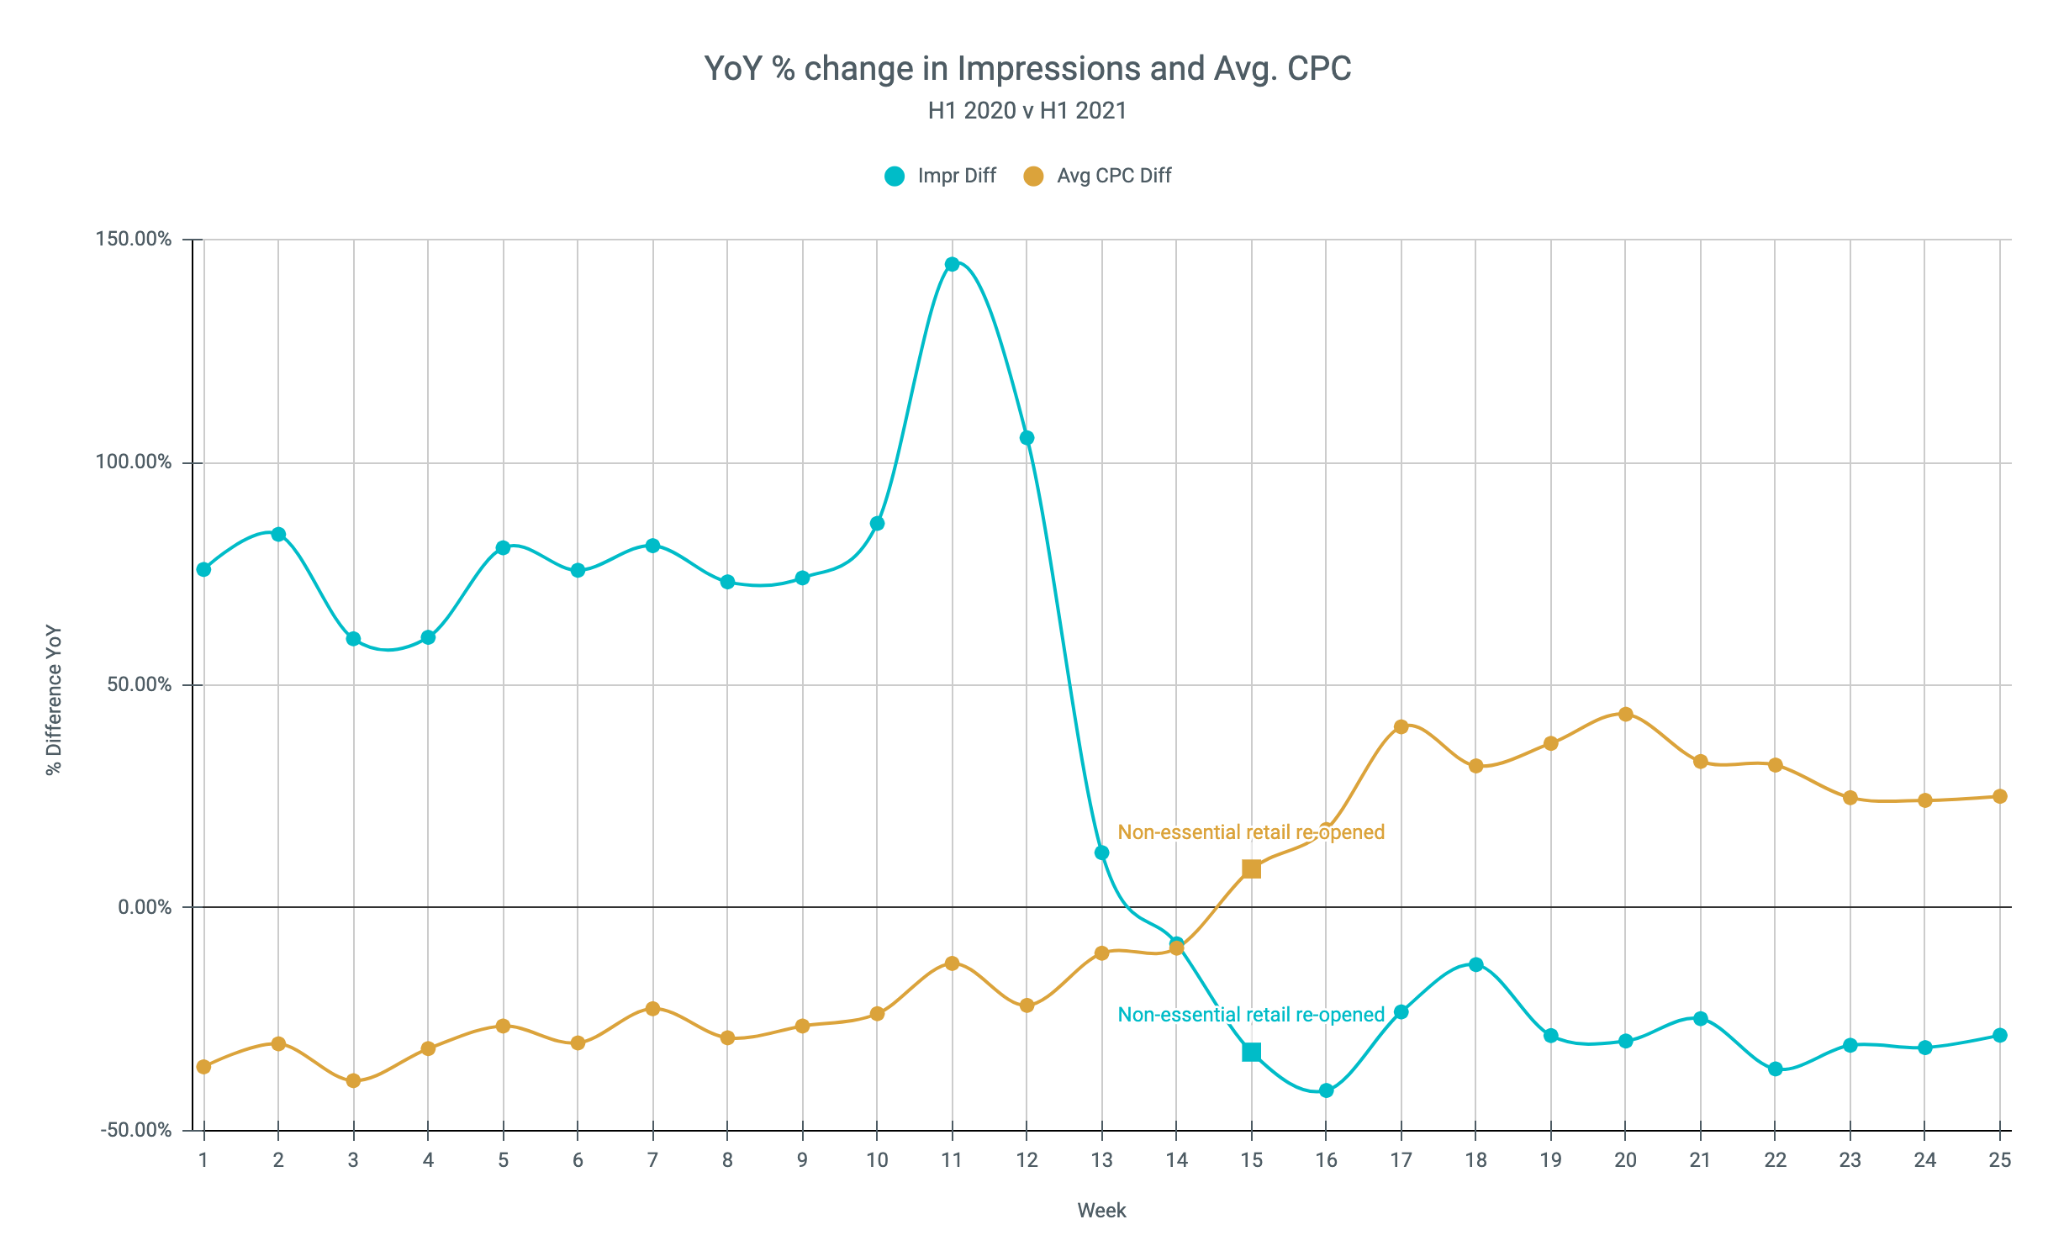 Graph showing YoY % change in impressions and CPC, showing a decrease in impressions resulting in increased CPC